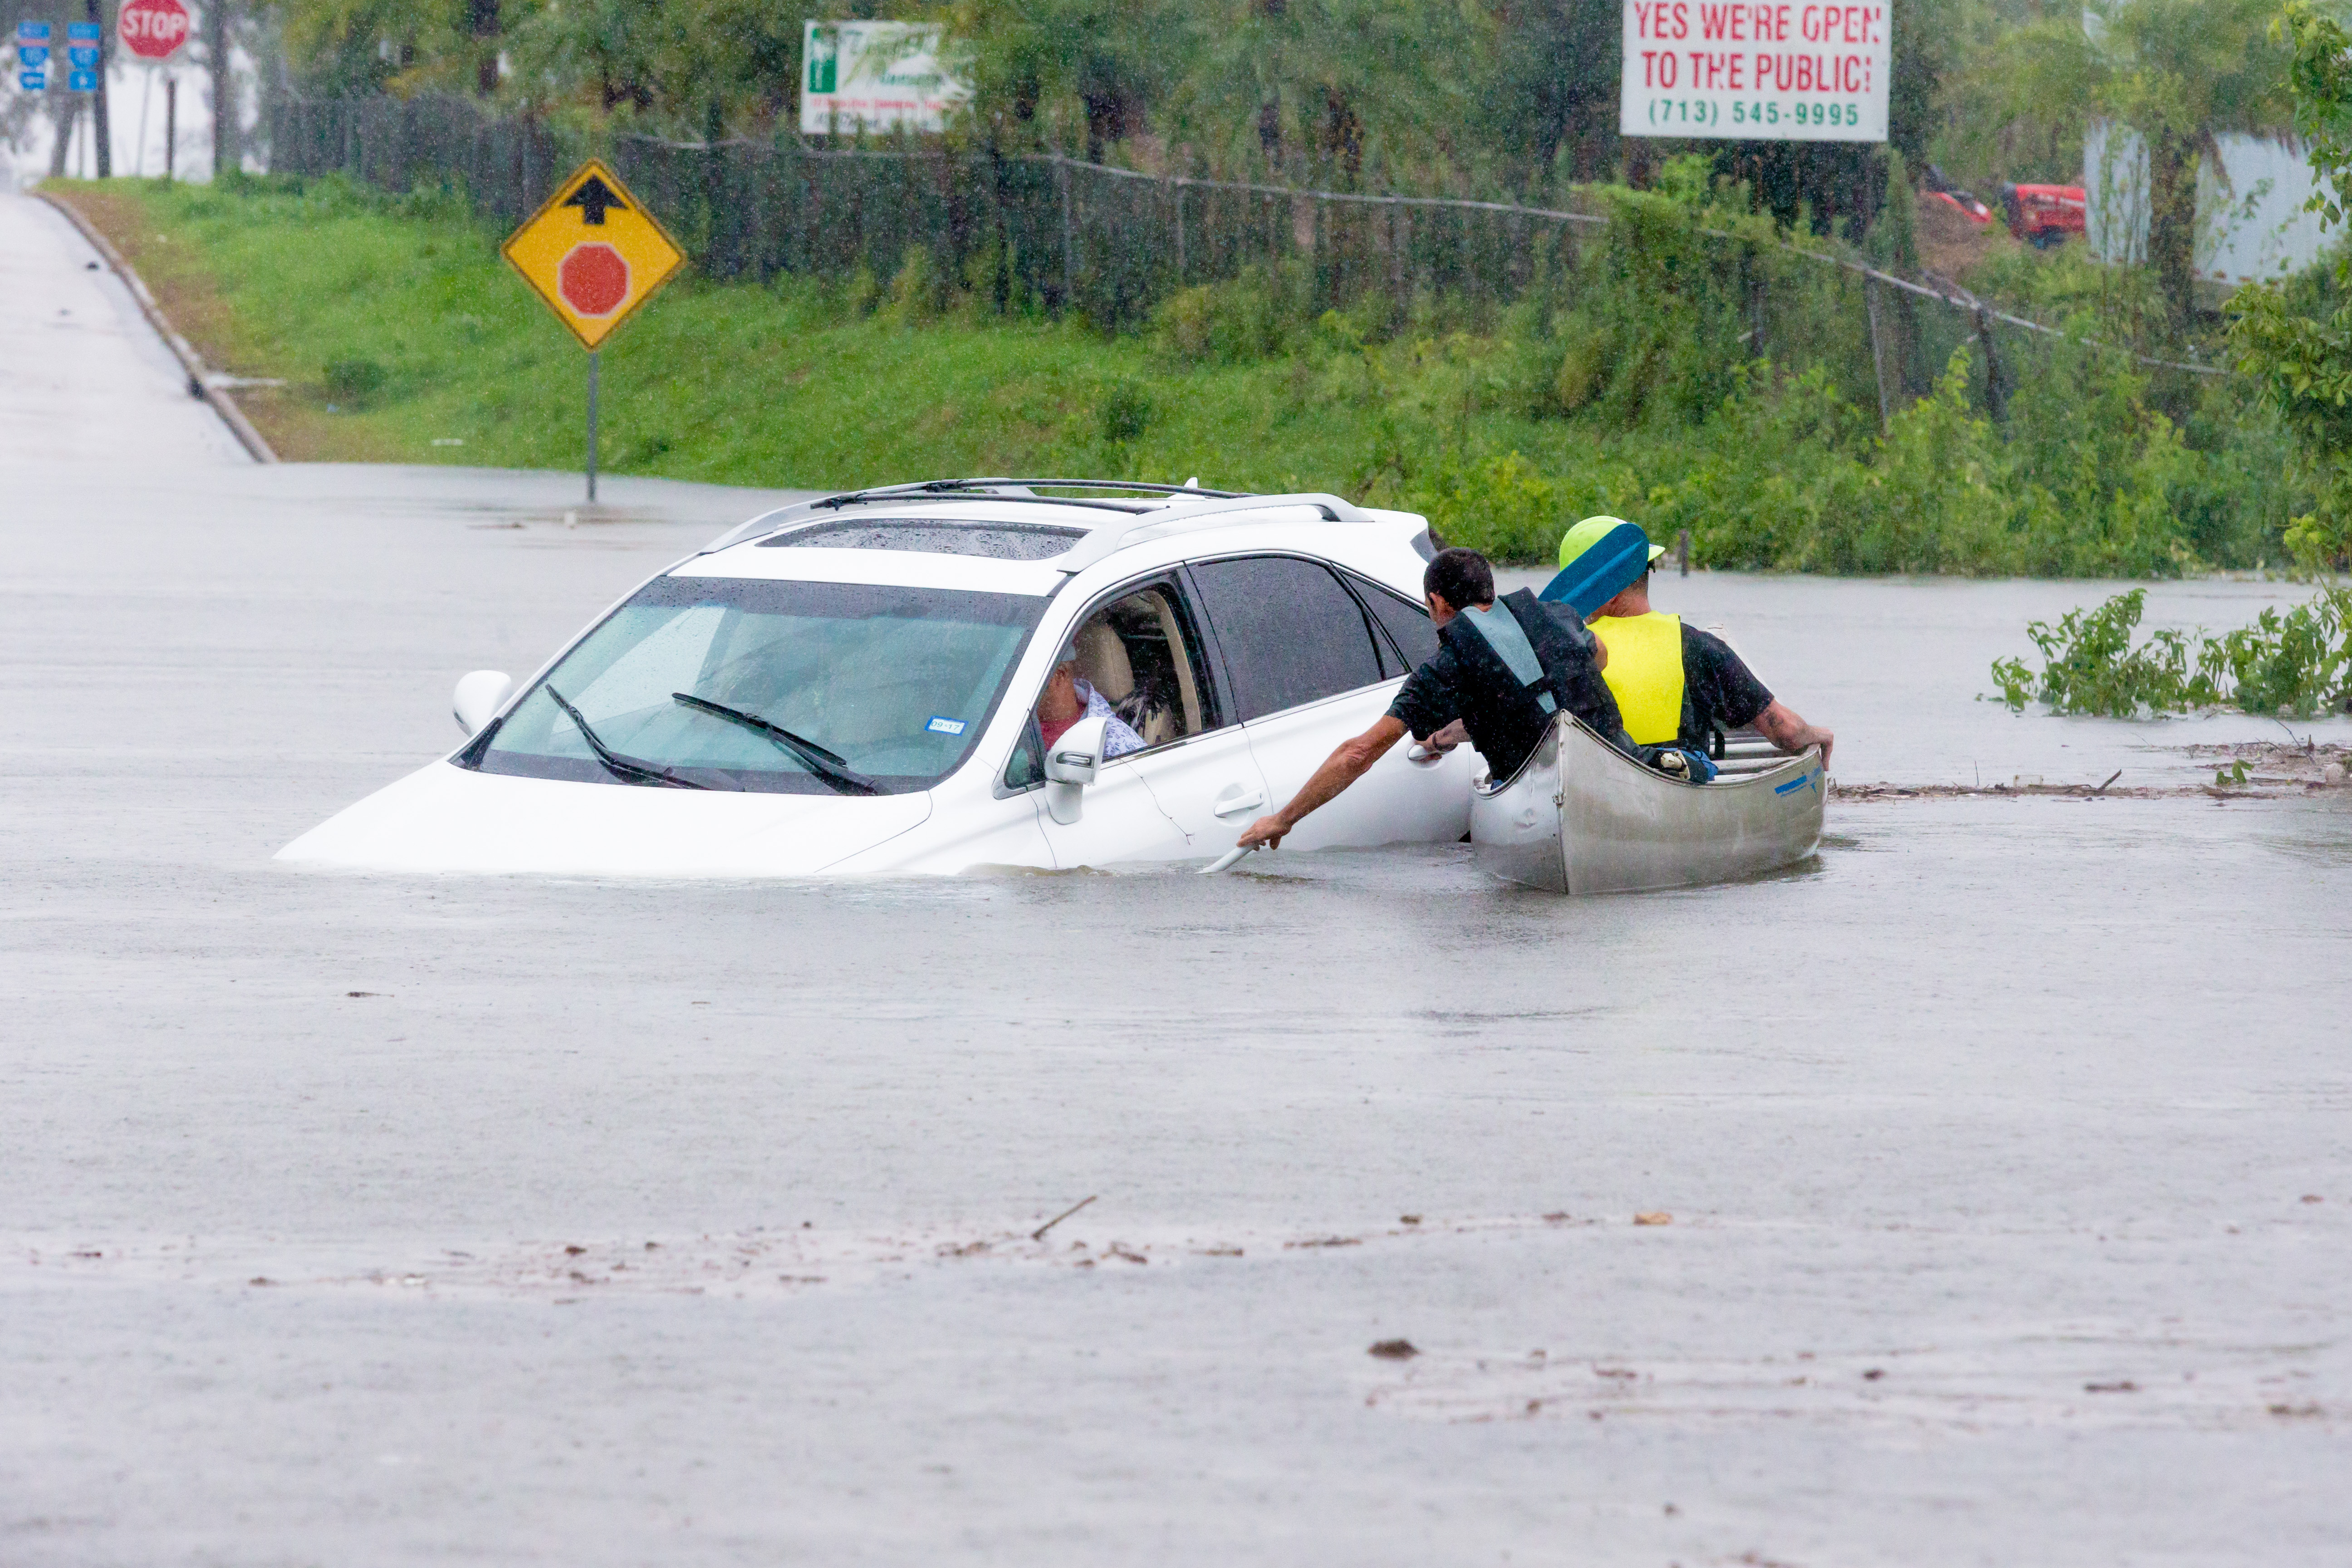 HOUSTON, TX - AUGUST 29: Volunteers in a canoe makes their way to assist a driver that was stalled going through high water during Hurricane Harvey, Monday, August 29, 2017. 